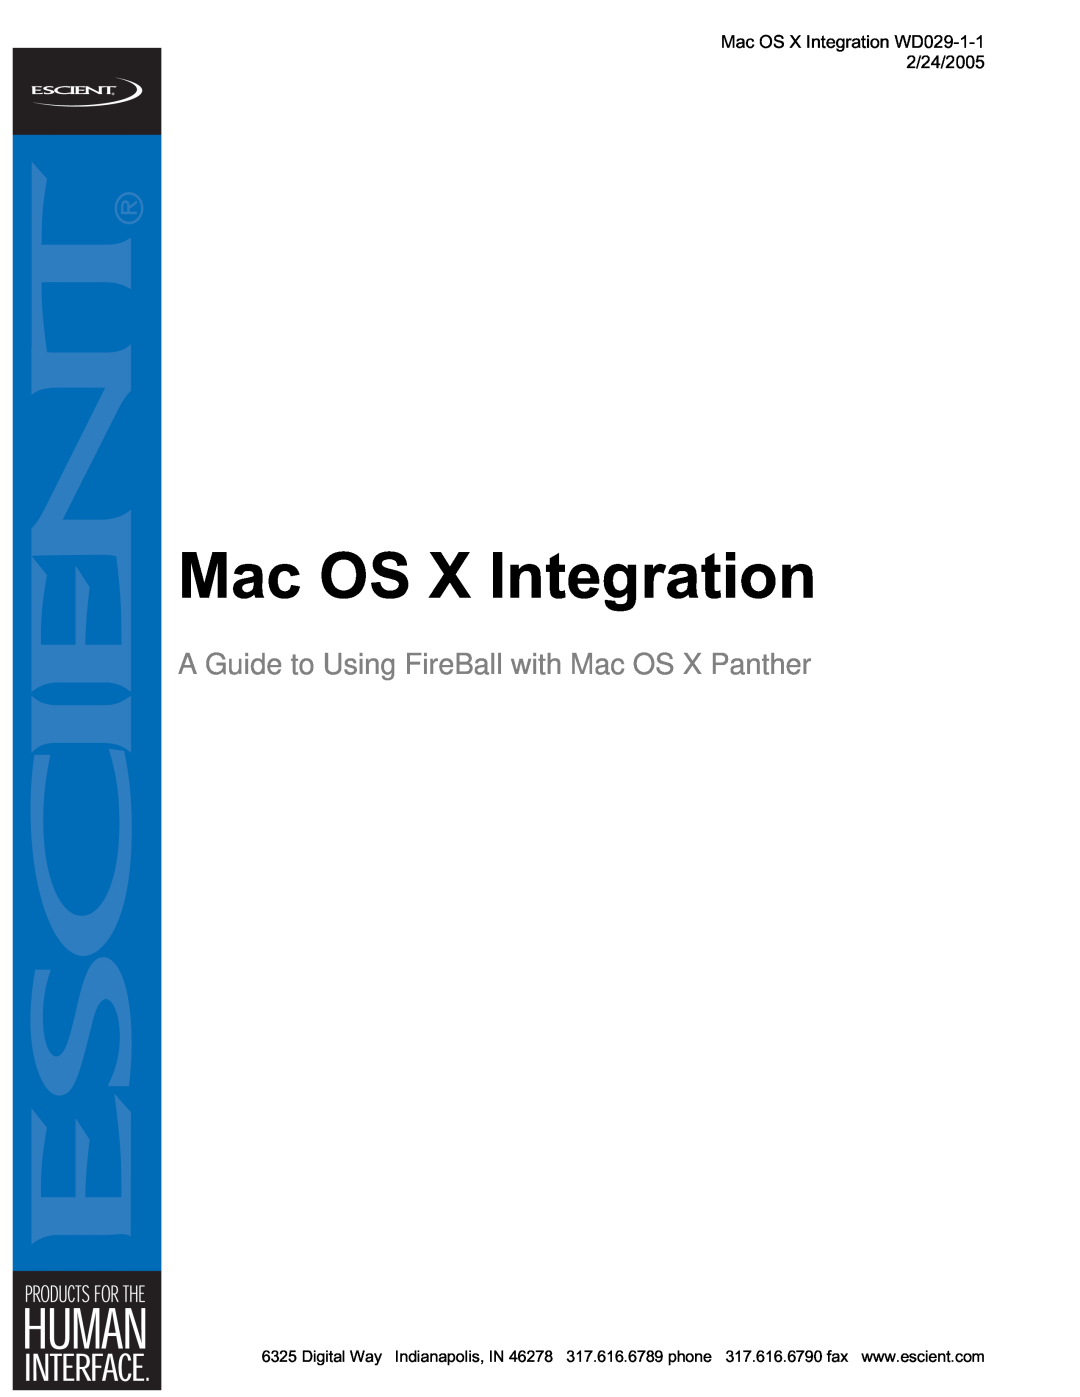 Escient MP-150 manual Mac OS X Integration, A Guide to Using FireBall with Mac OS X Panther 